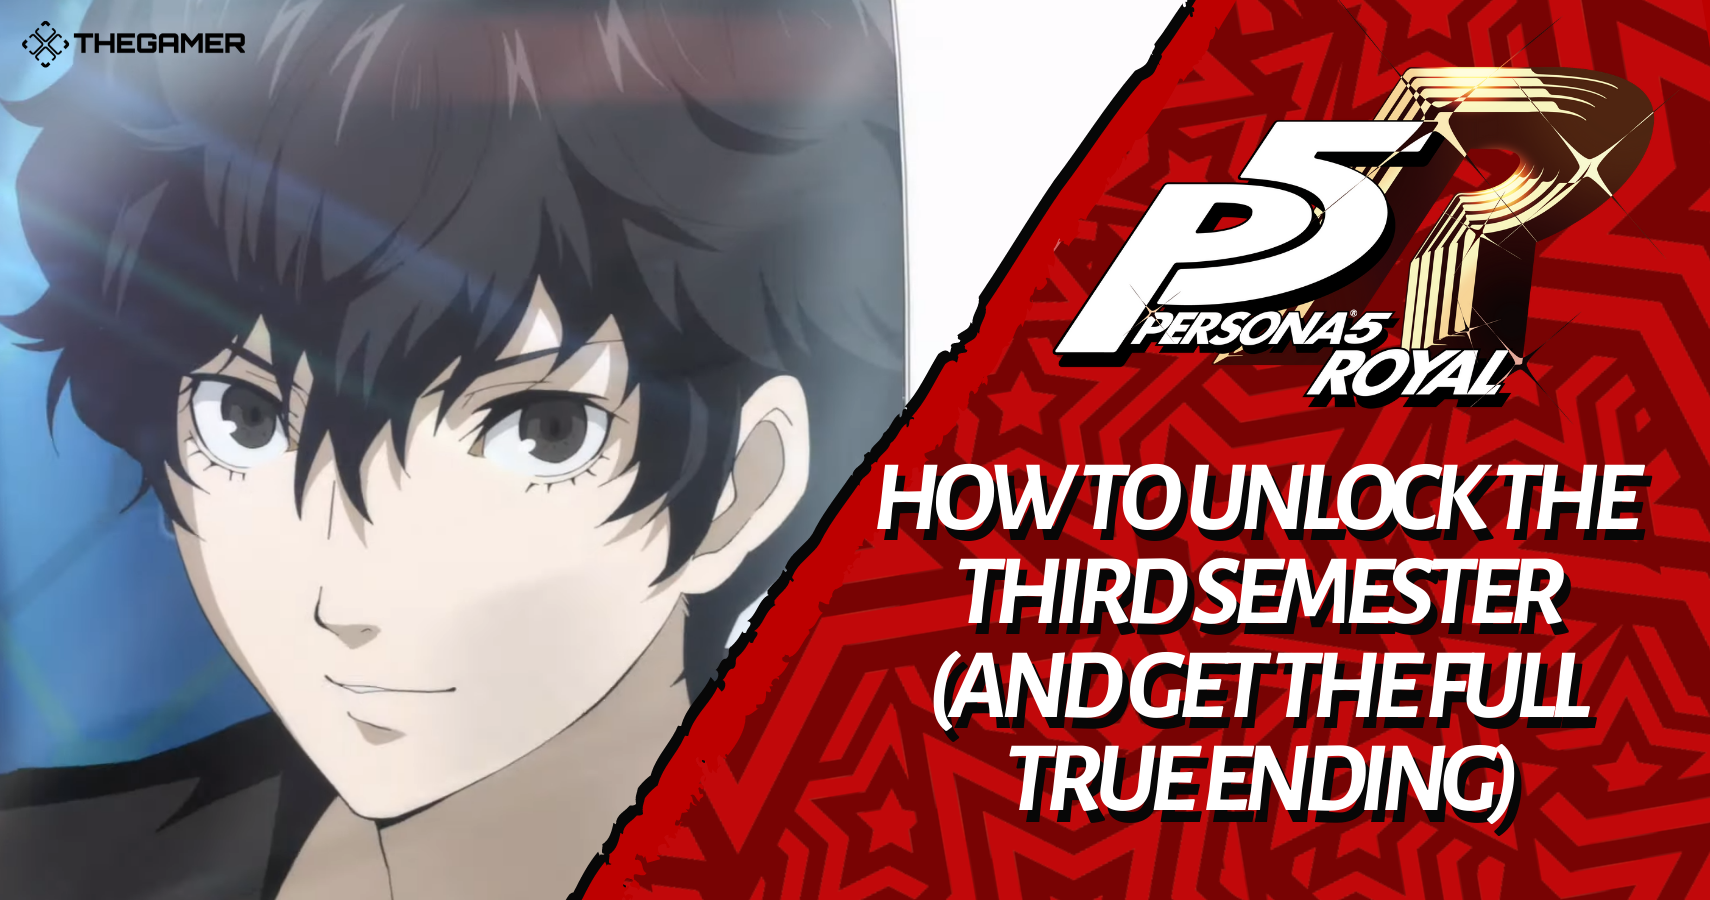 Persona 5 Royal darts answers and minigame guide - Polygon